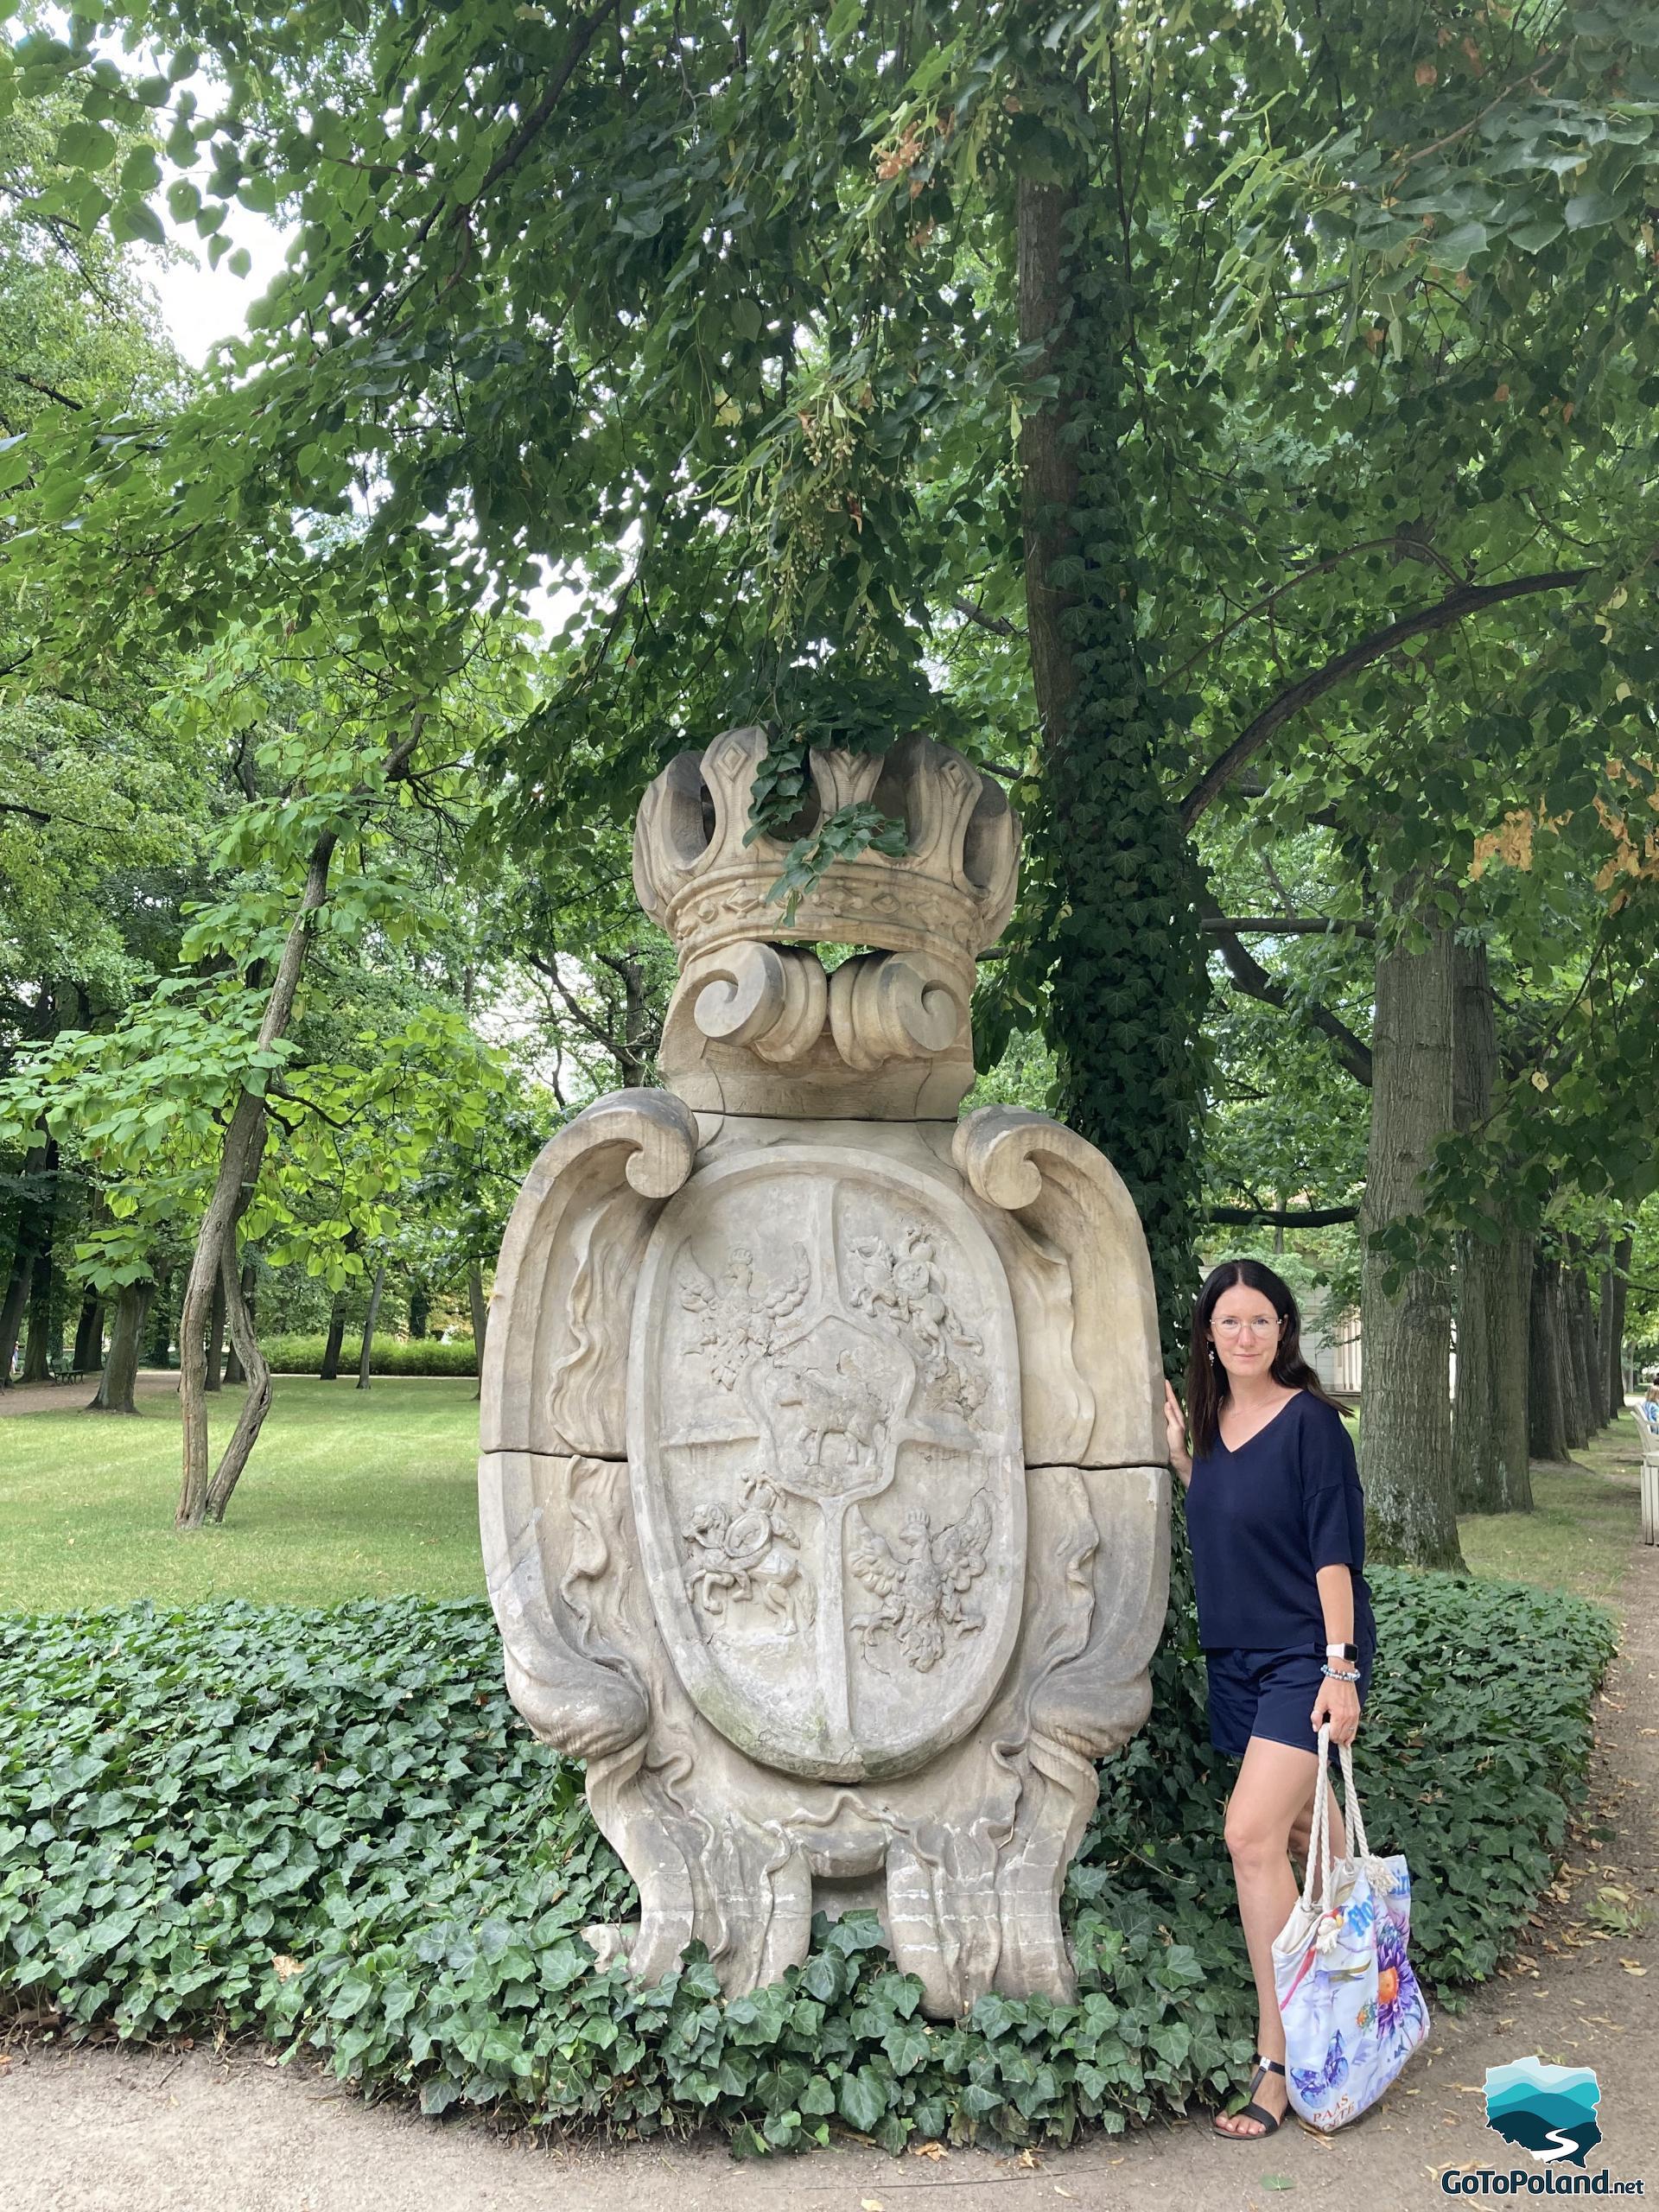 a woman stands by a stone cartouche with a coat of arms, trees in the background